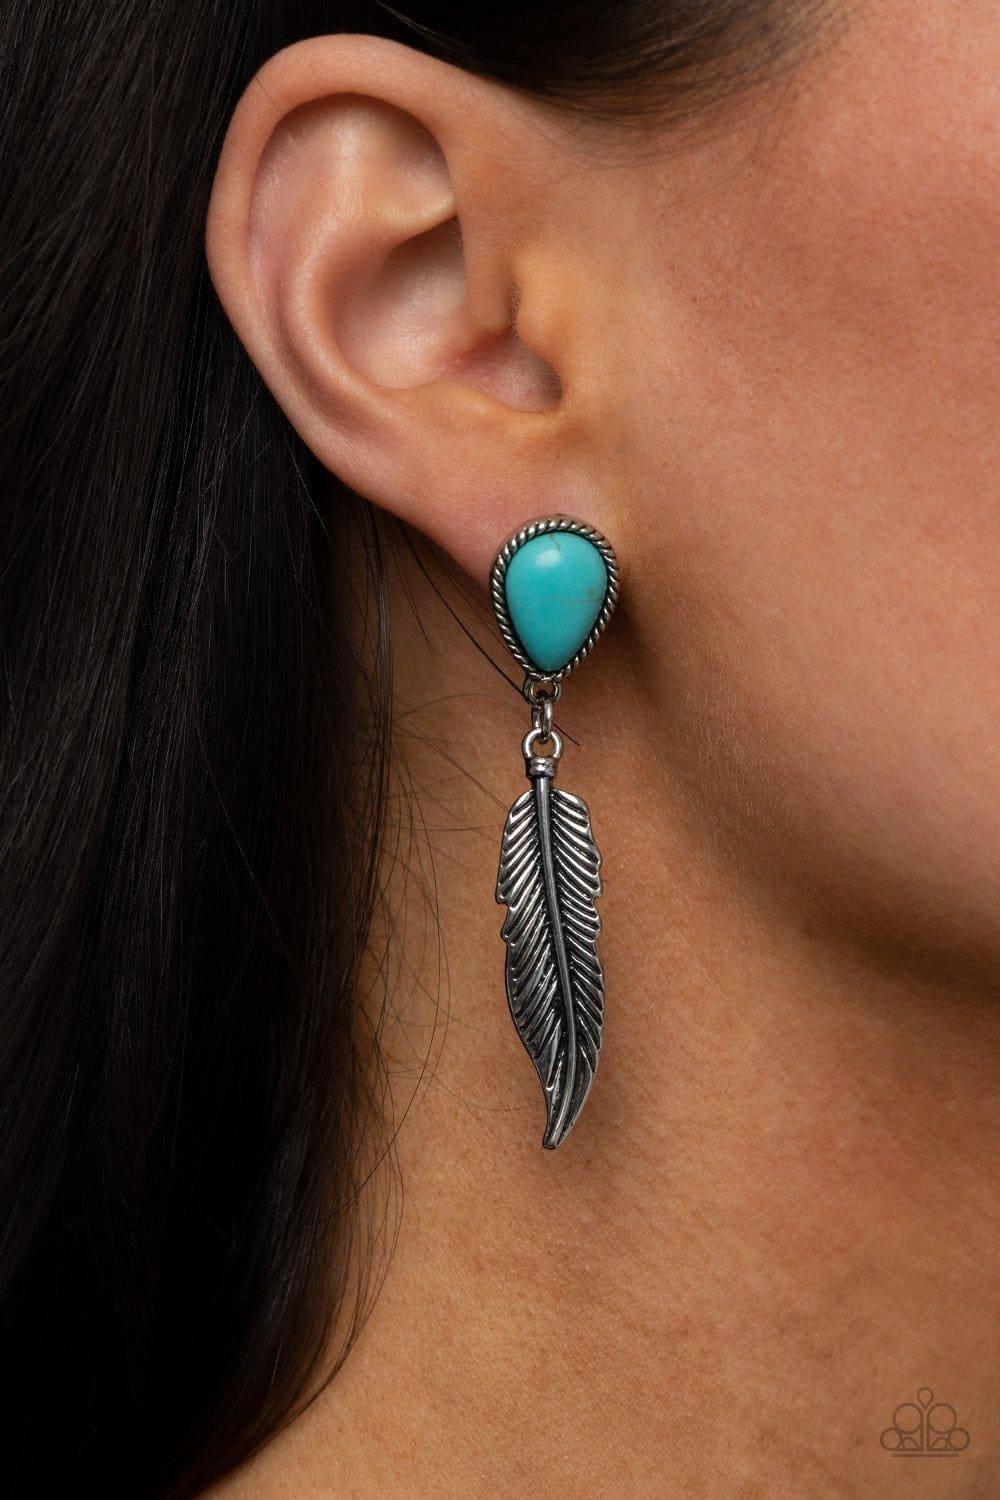 Paparazzi Accessories - Totally Tran-quill - Blue (turquoise) Earrings - Bling by JessieK